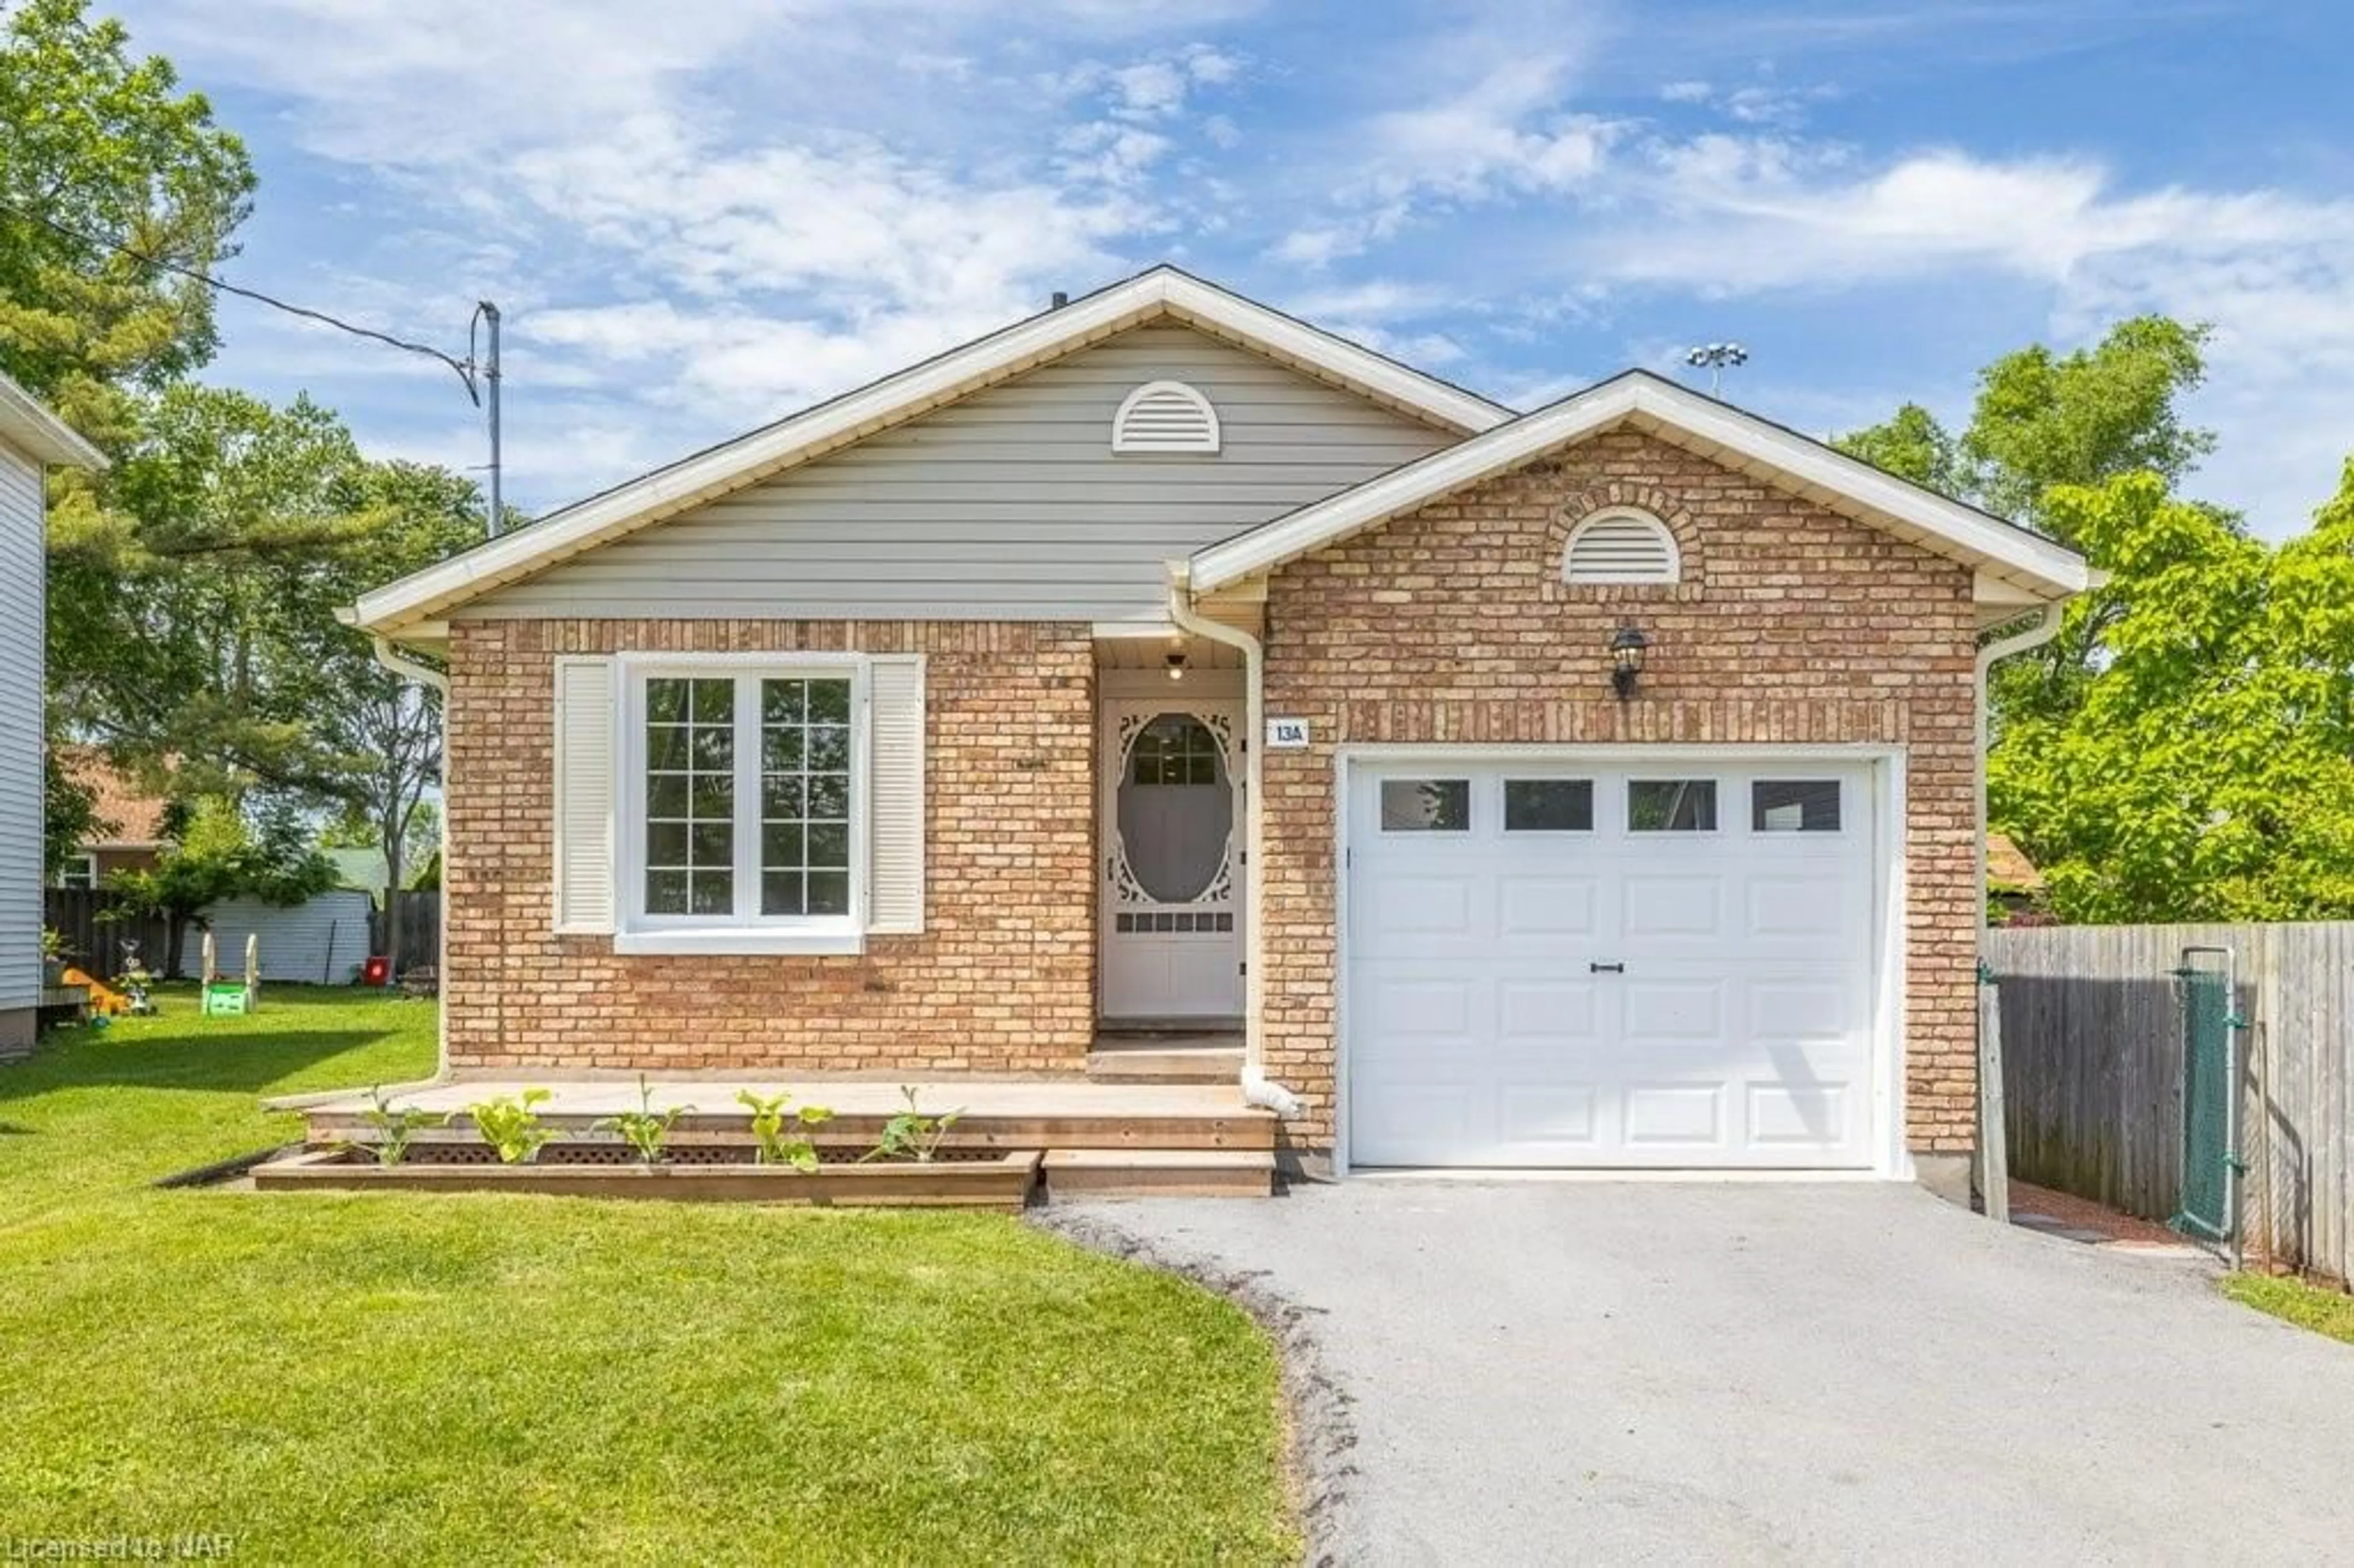 Home with brick exterior material for 13A Elmwood Ave, St. Catharines Ontario L2R 2T5